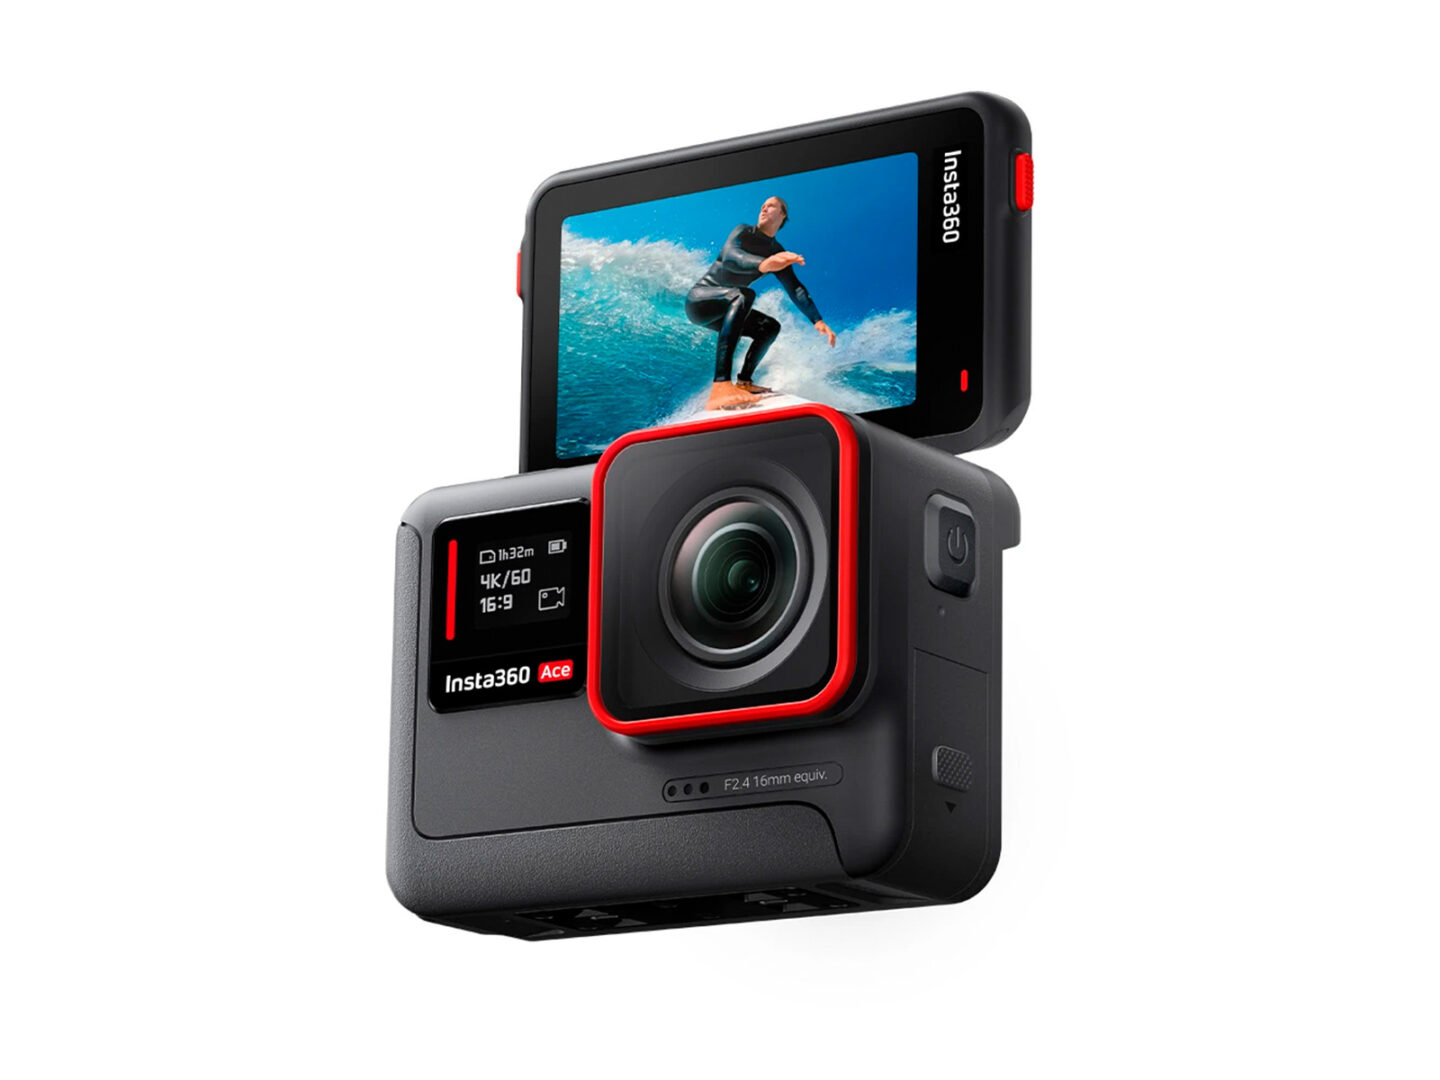 Insta360 partners with Leica for Ace Pro action camera - HIGHXTAR.